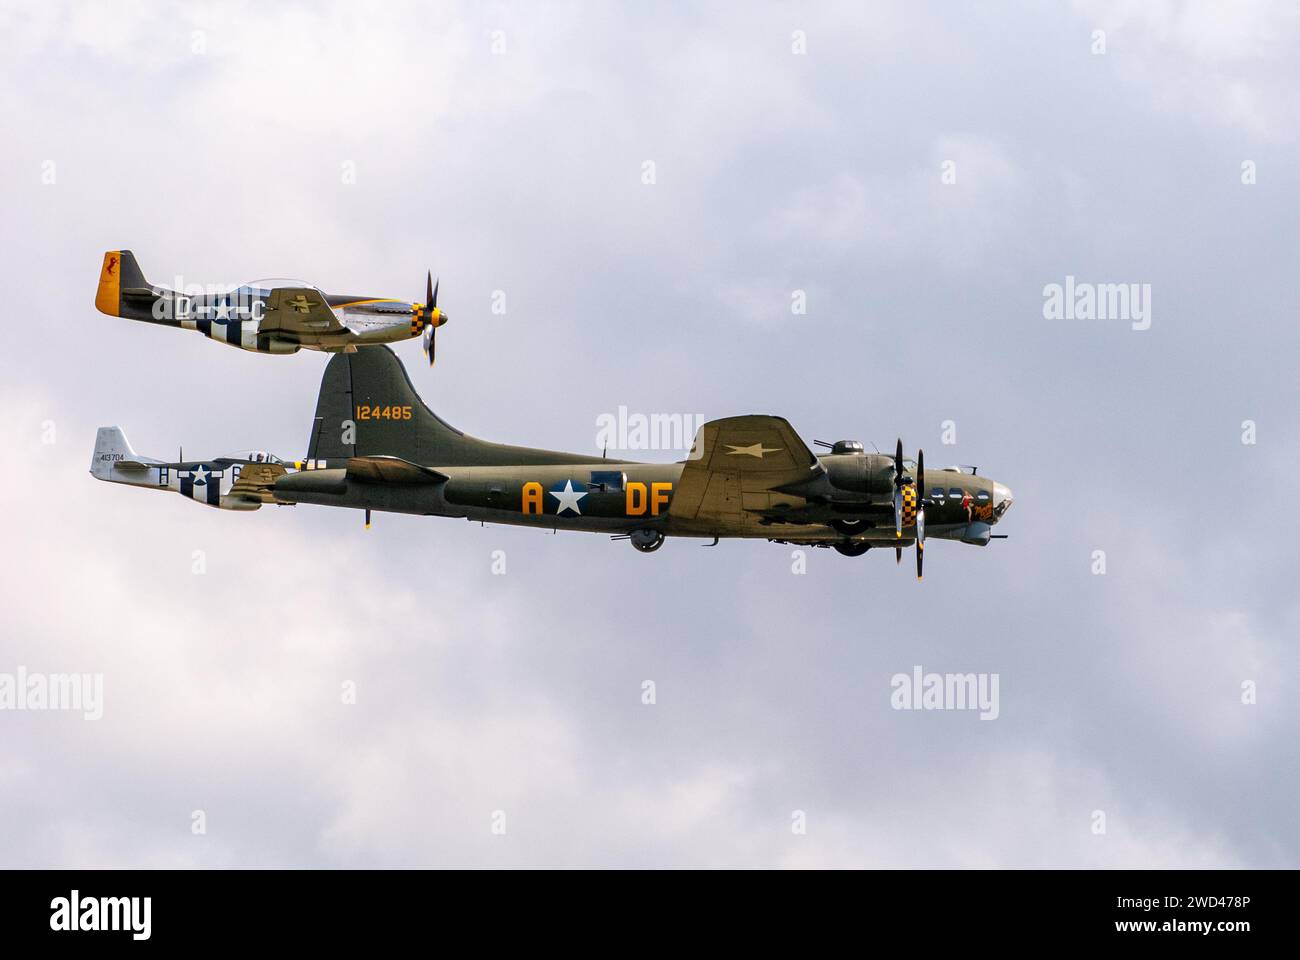 B-17G Flying Fortress with P51 Mustang fighter planes.  WW2 Bomber plane from United States airforce representing the famous 'Memphis Belle' 124485' Stock Photo